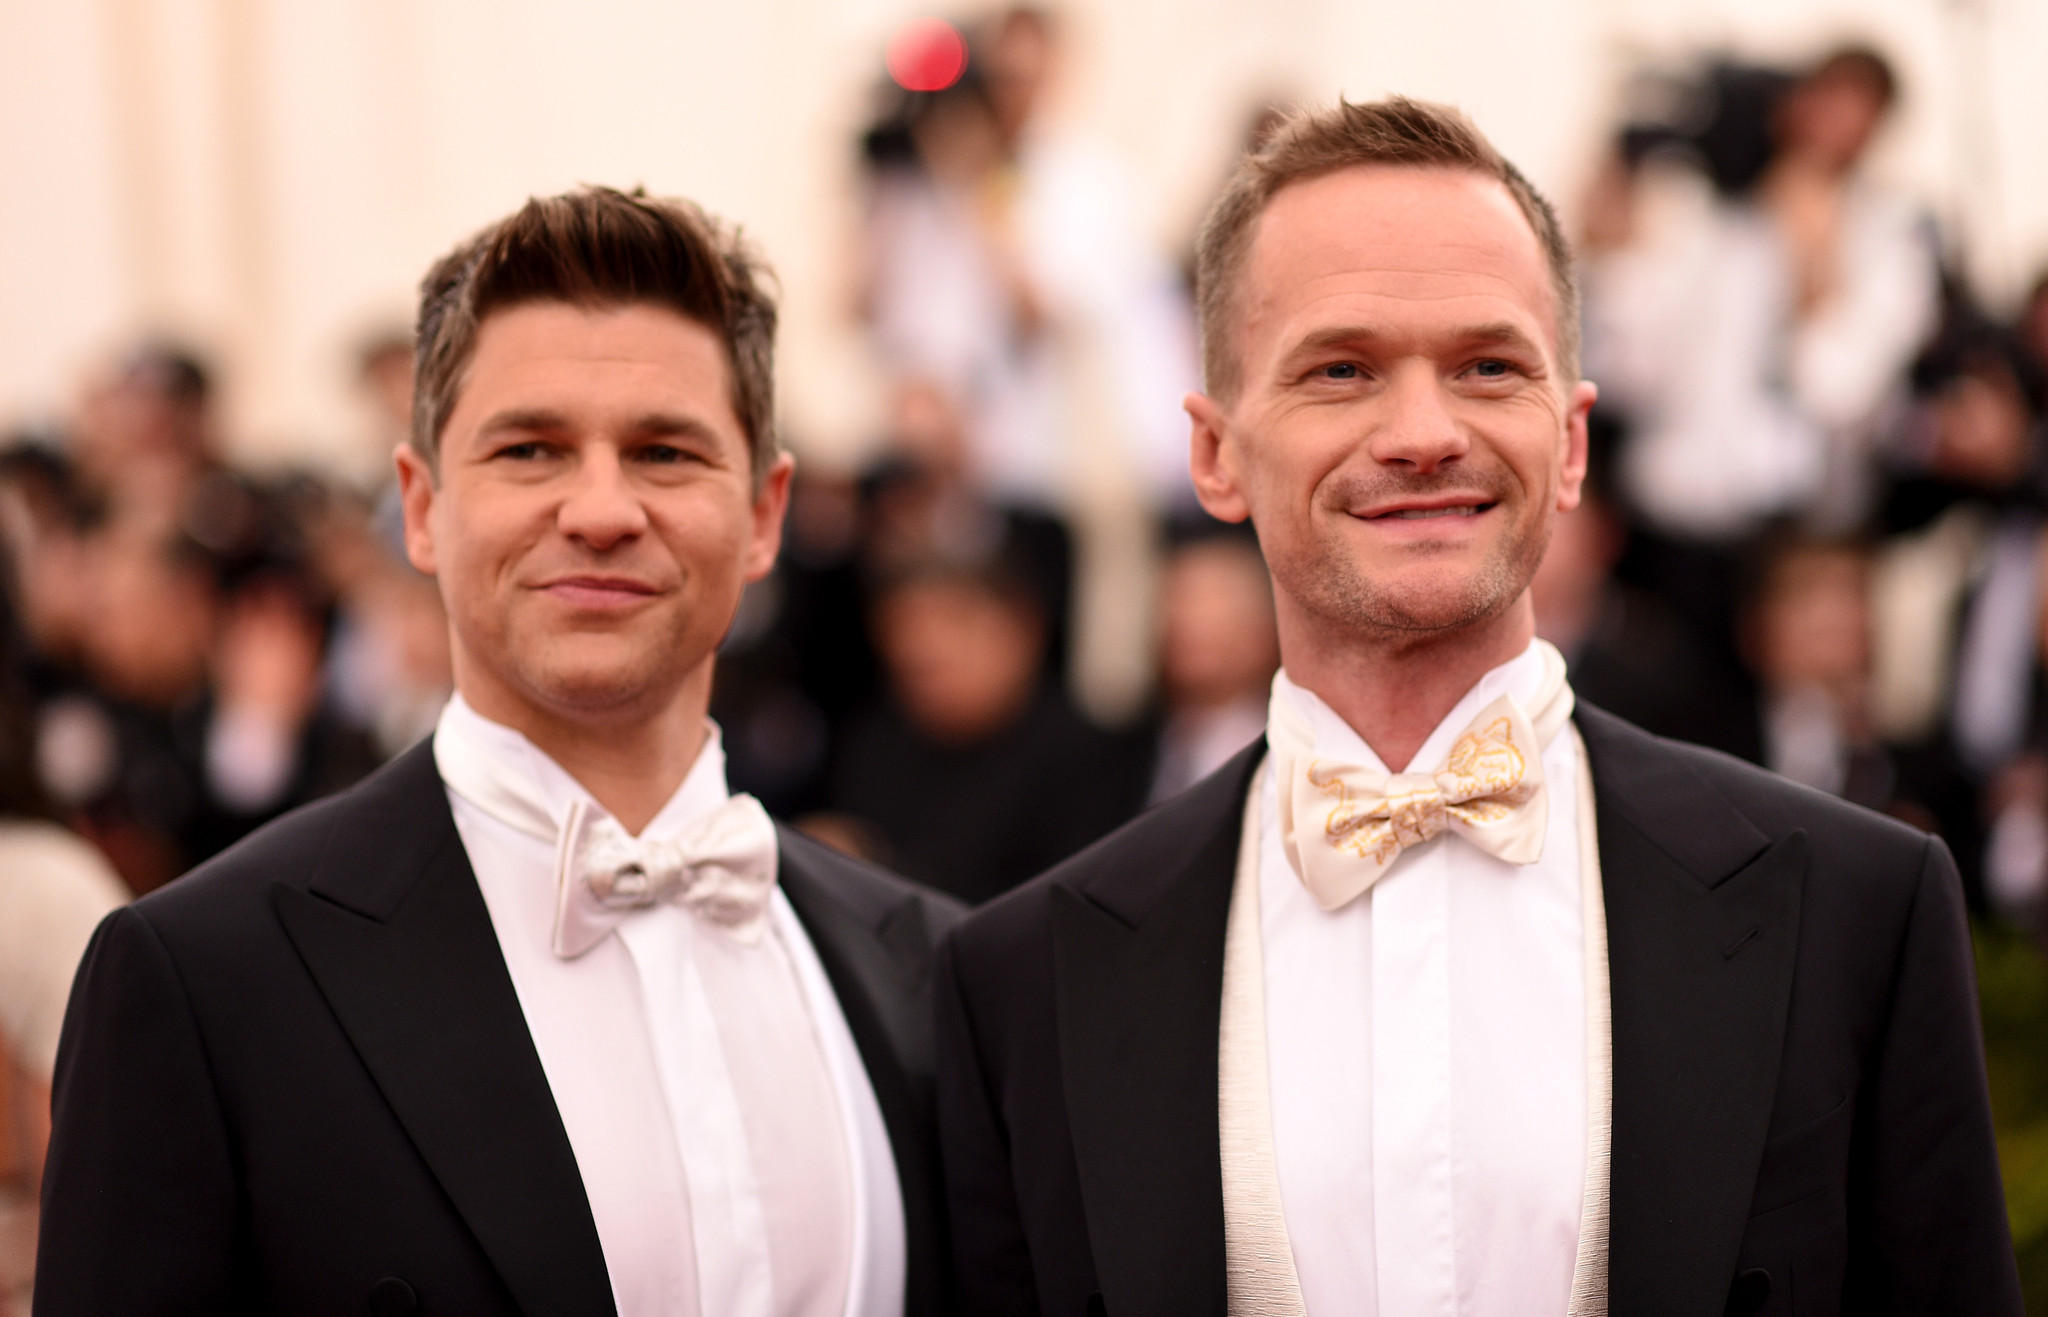 Celebrities Are Overwhelmingly Jubilant About Same Sex